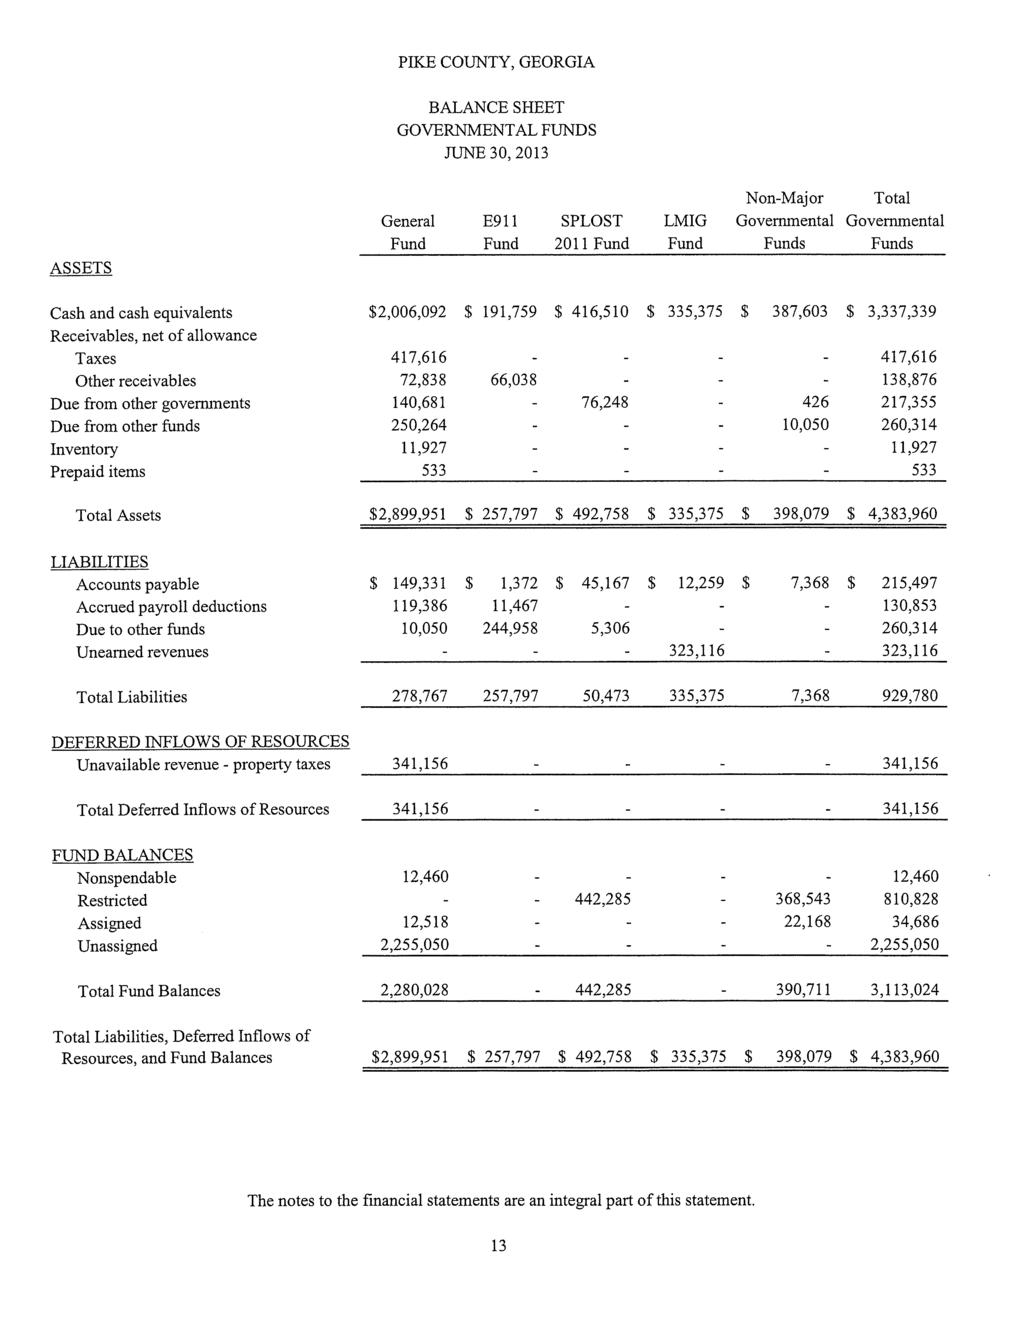 BALANCE SHEET GOVERNMENTAL FUNDS JUNE 30, 2013 ASSETS General Fund Non-Major E91 1 SPLOST LMIG Governmental Fund 2011 Fund Fund Funds Total Governmental Funds Cash and cash equivalents Receivables,